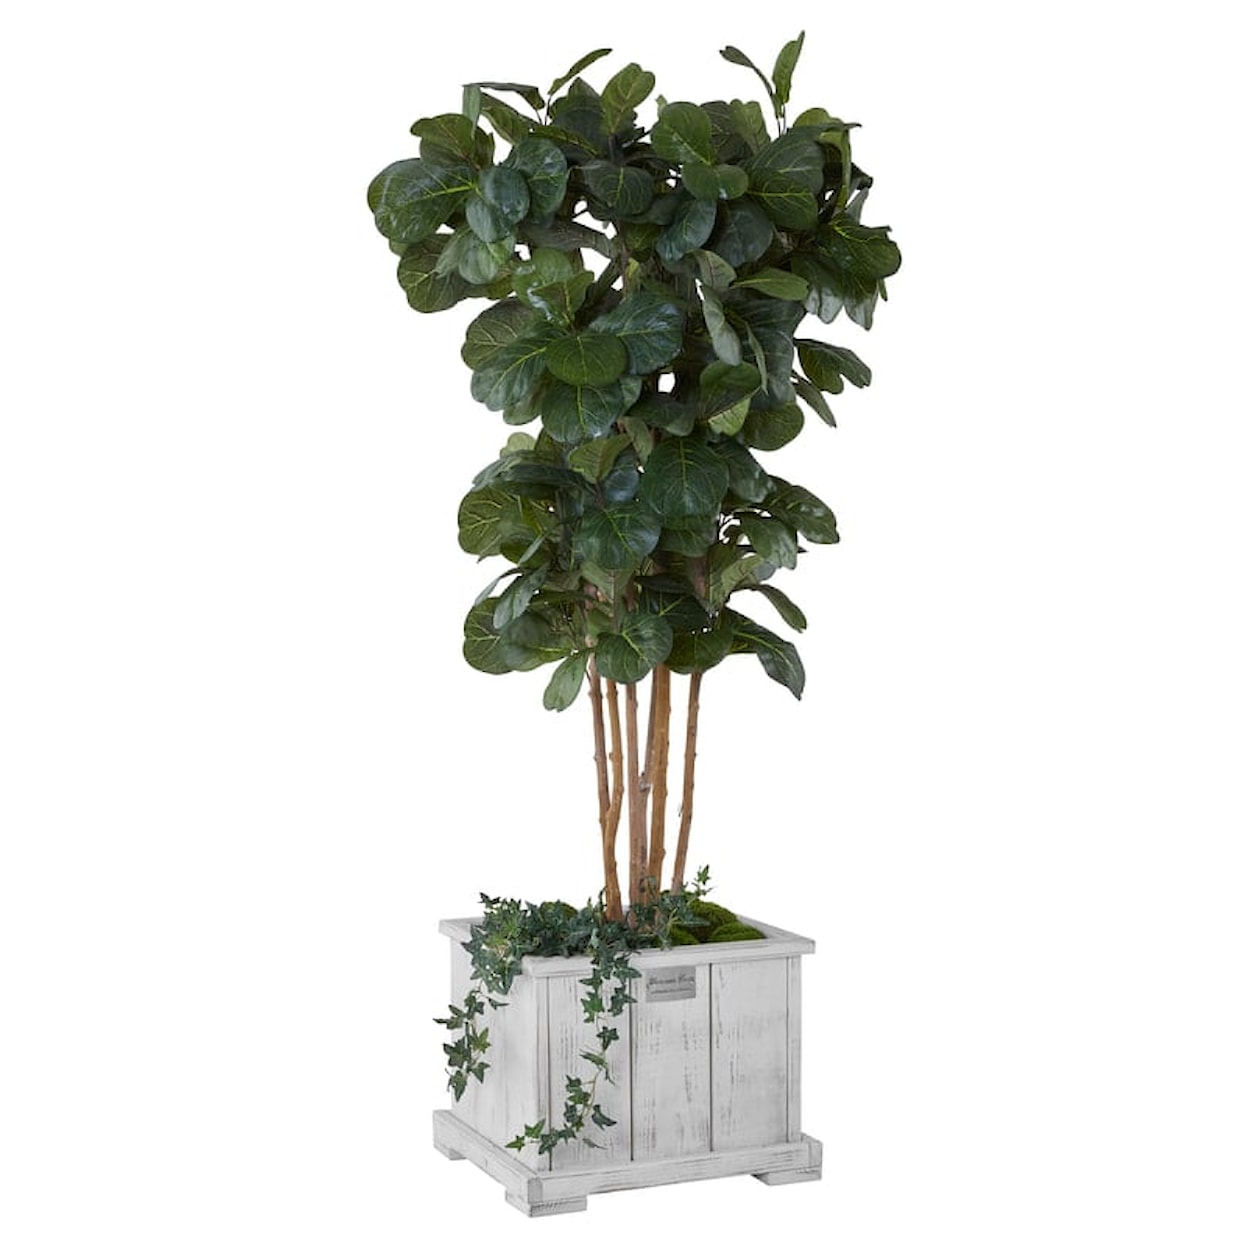 Uwharrie Chair The Companion Collection PLANTER BOX